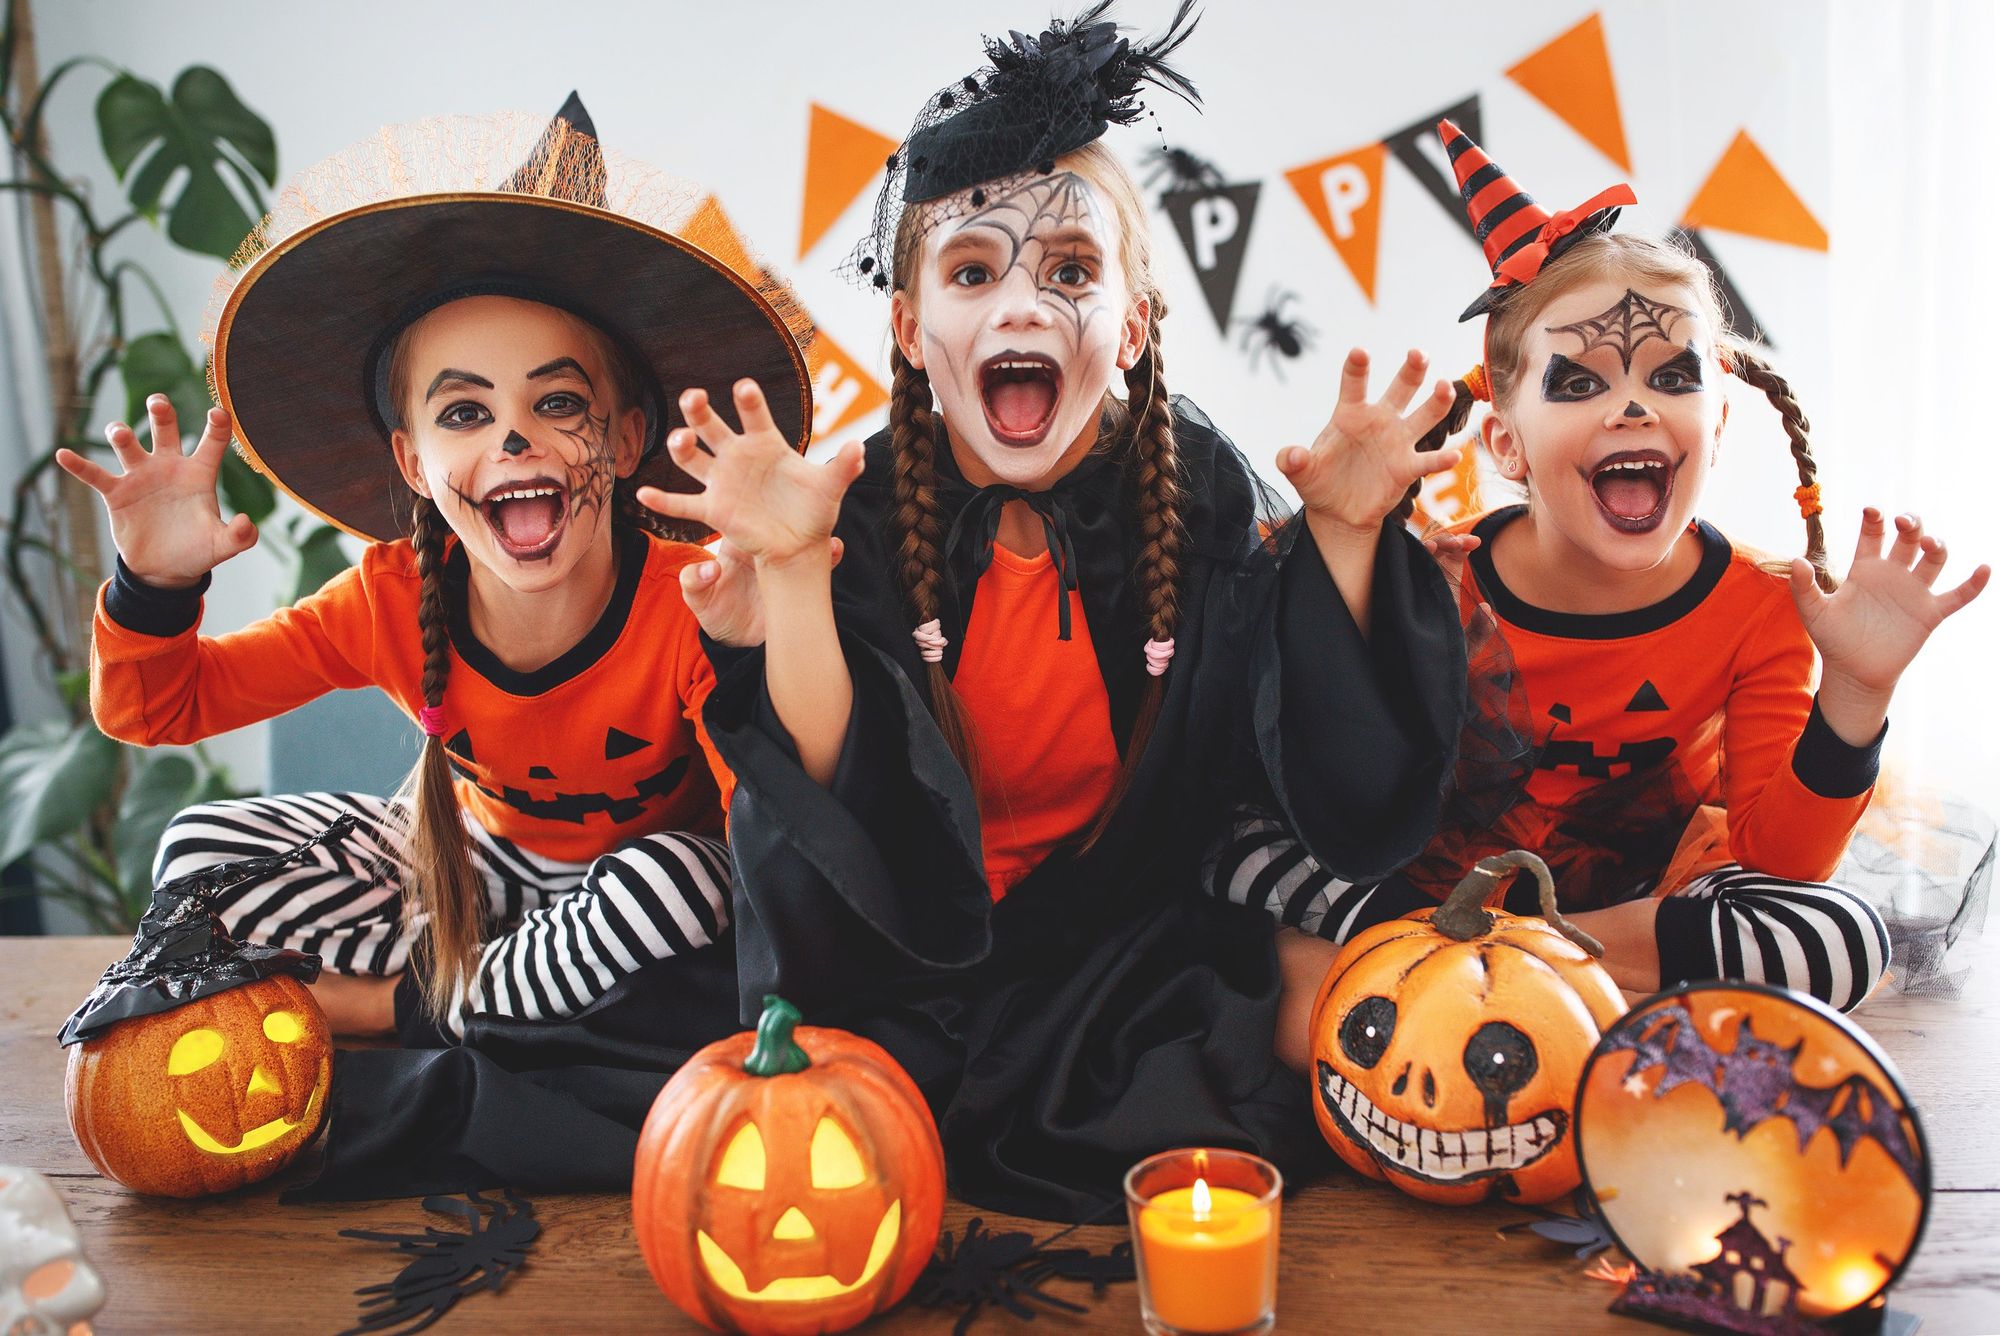 Super Spooky Halloween Party – More Ideas Added!